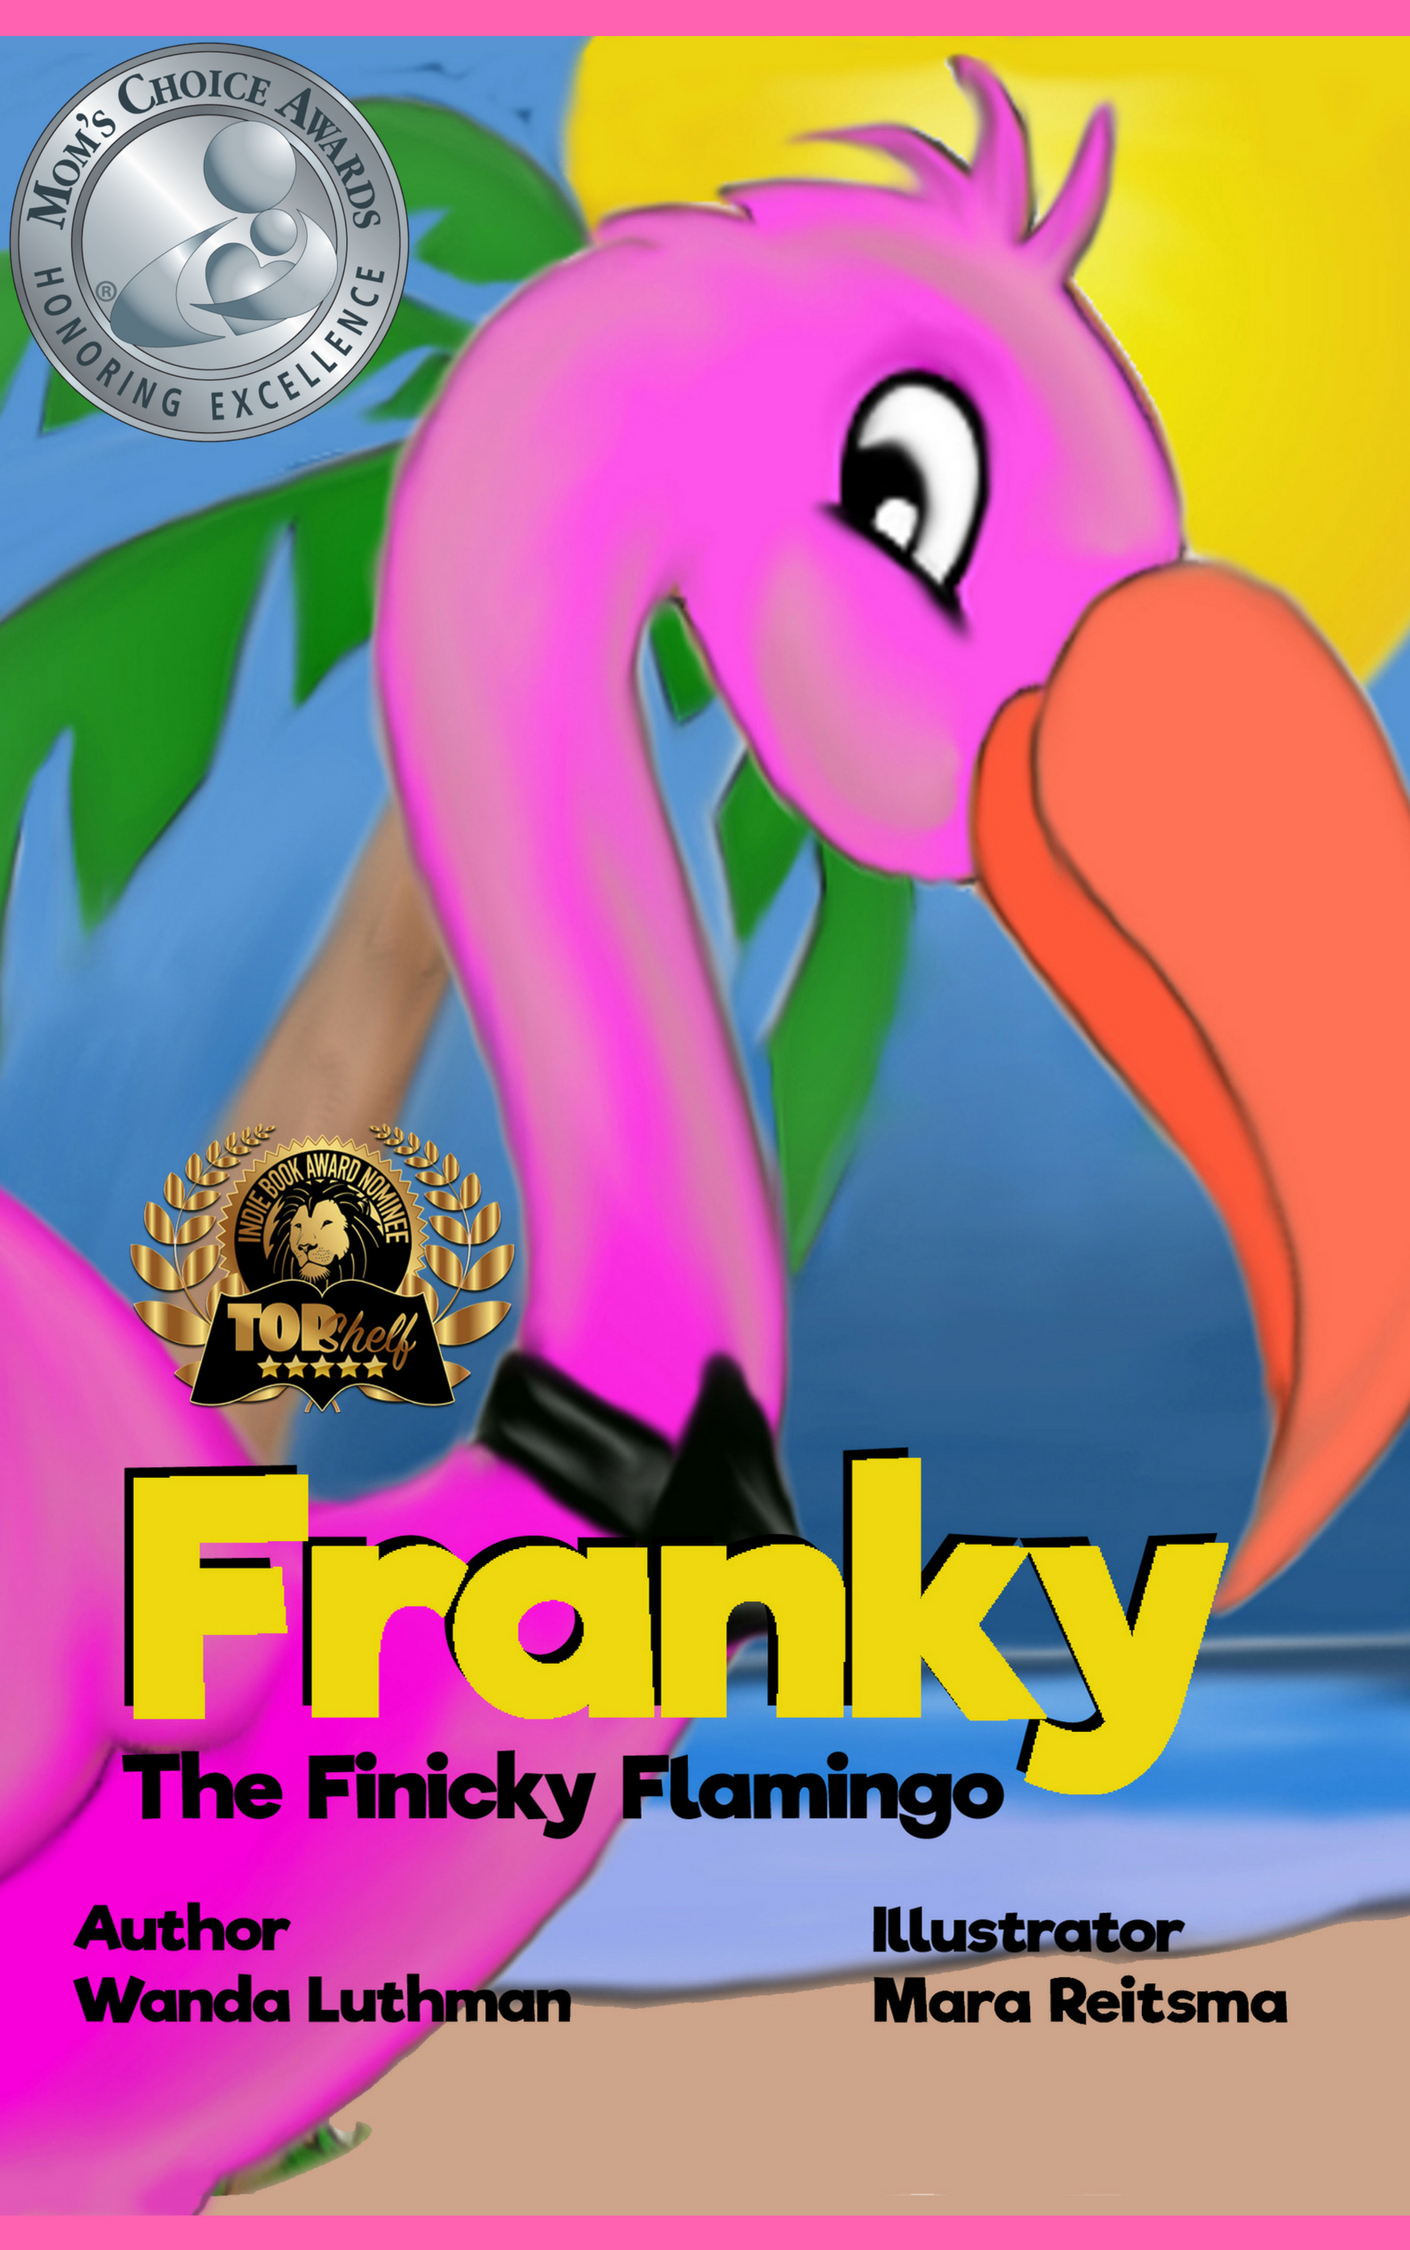 Franky the Finicky Flamingo picture book cover by Wanda Luthman and illustrated by Mara Reitsma showing Top Shelf Nomination Award and Mom's Choice Award emblems